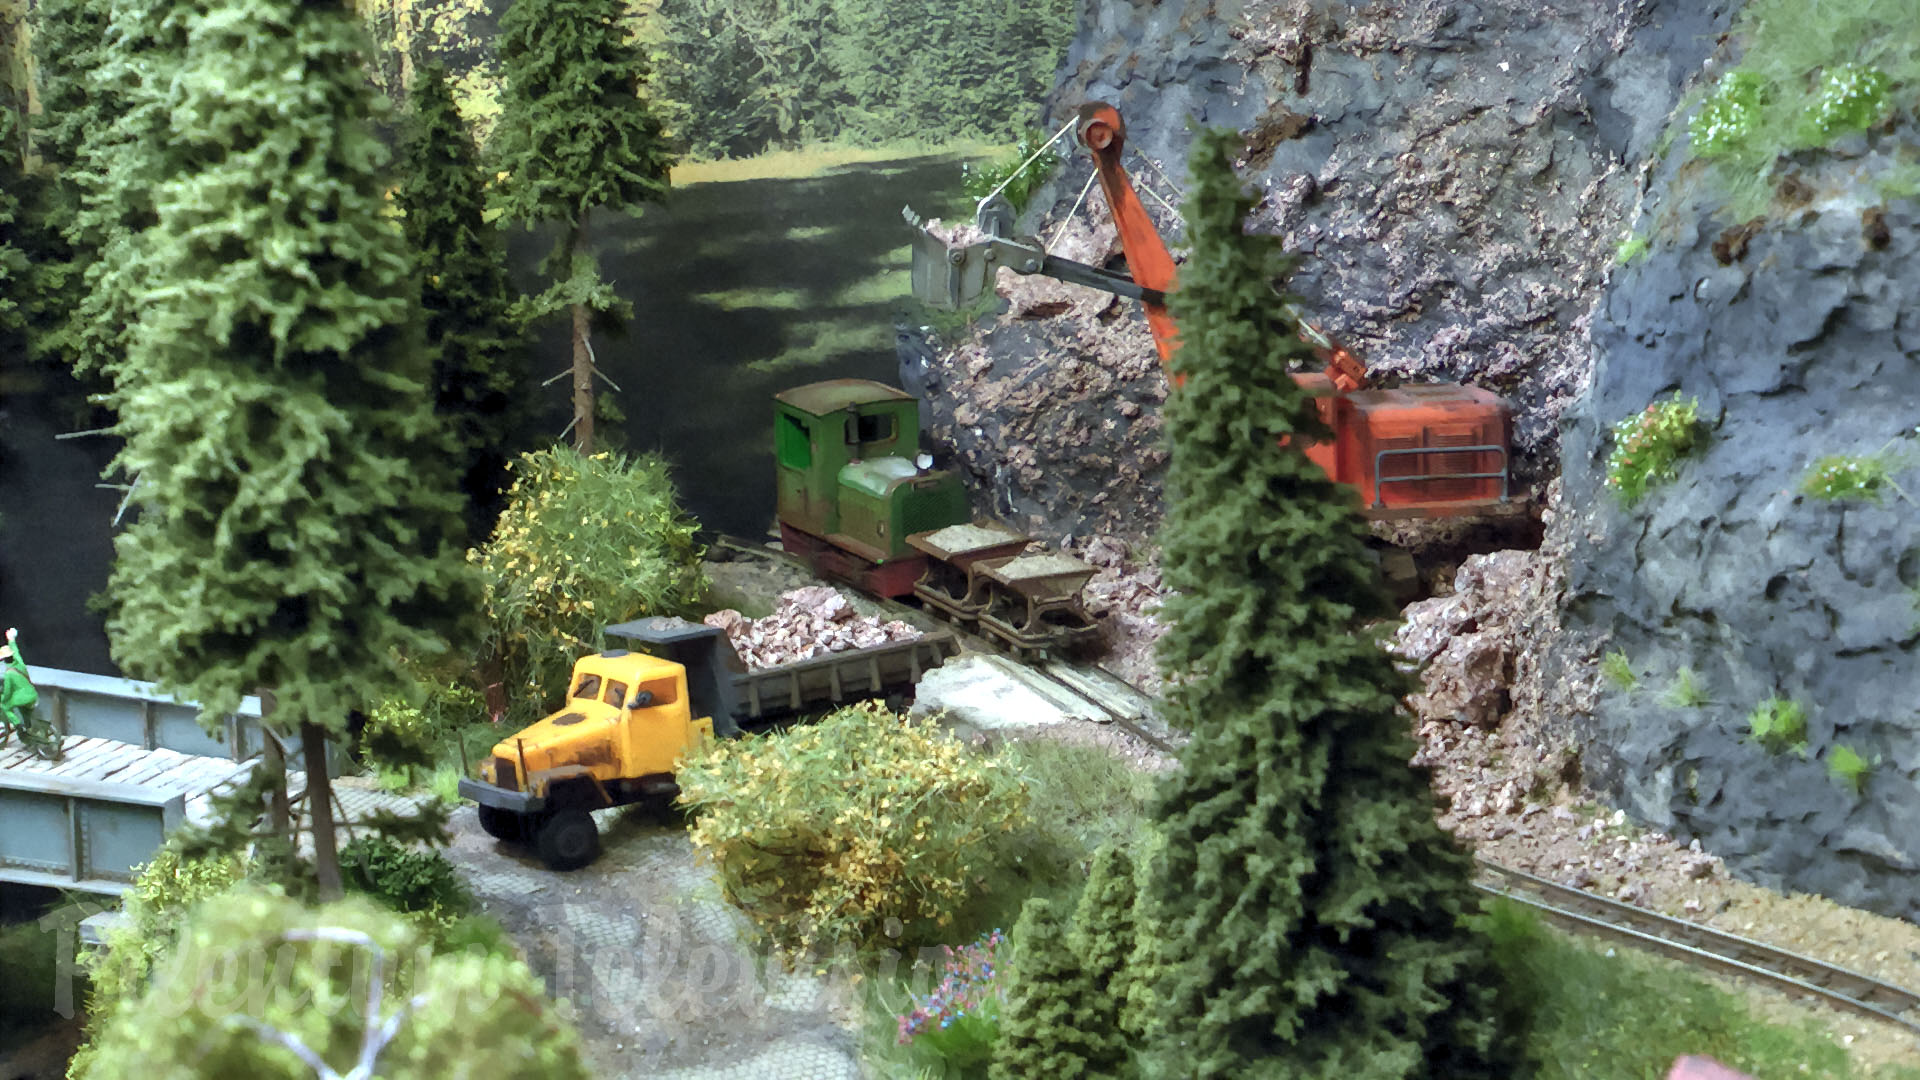 Micro Model Railway and Narrow Gauge Steam Trains in a Stone Quarry in HOn30 Scale